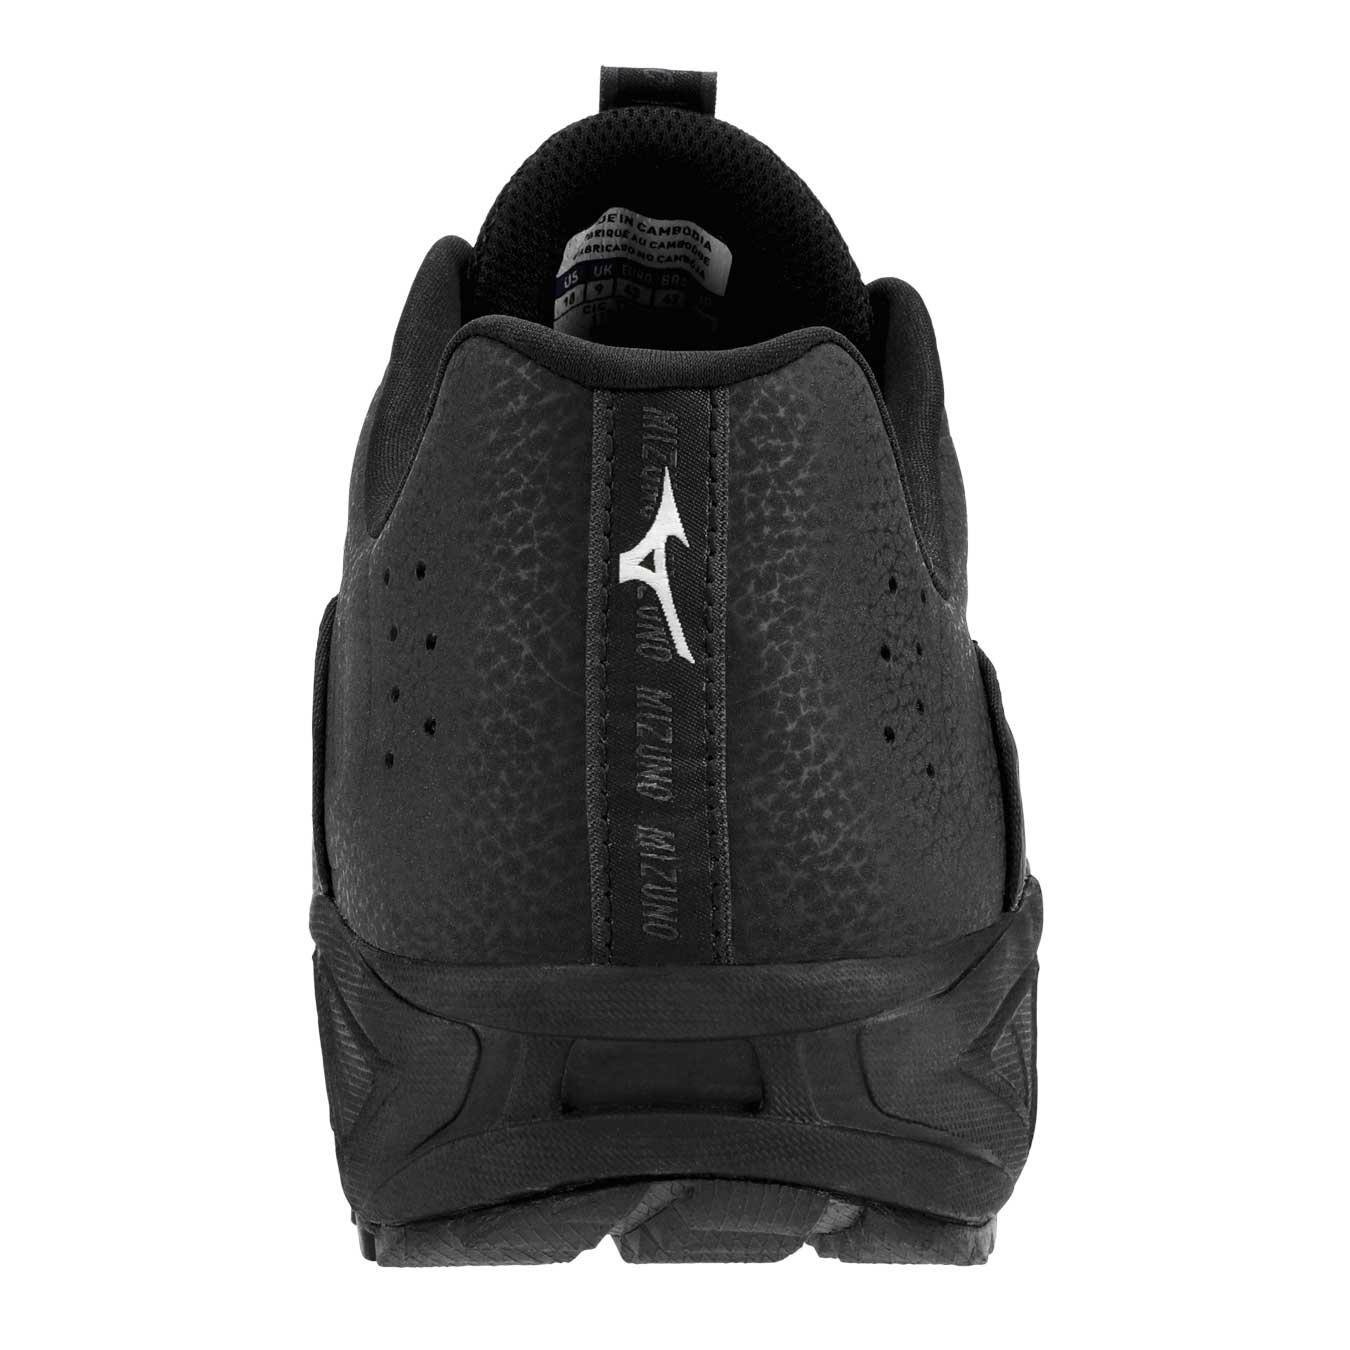 Mizuno Ambition 3 All-Surface Low Turfs